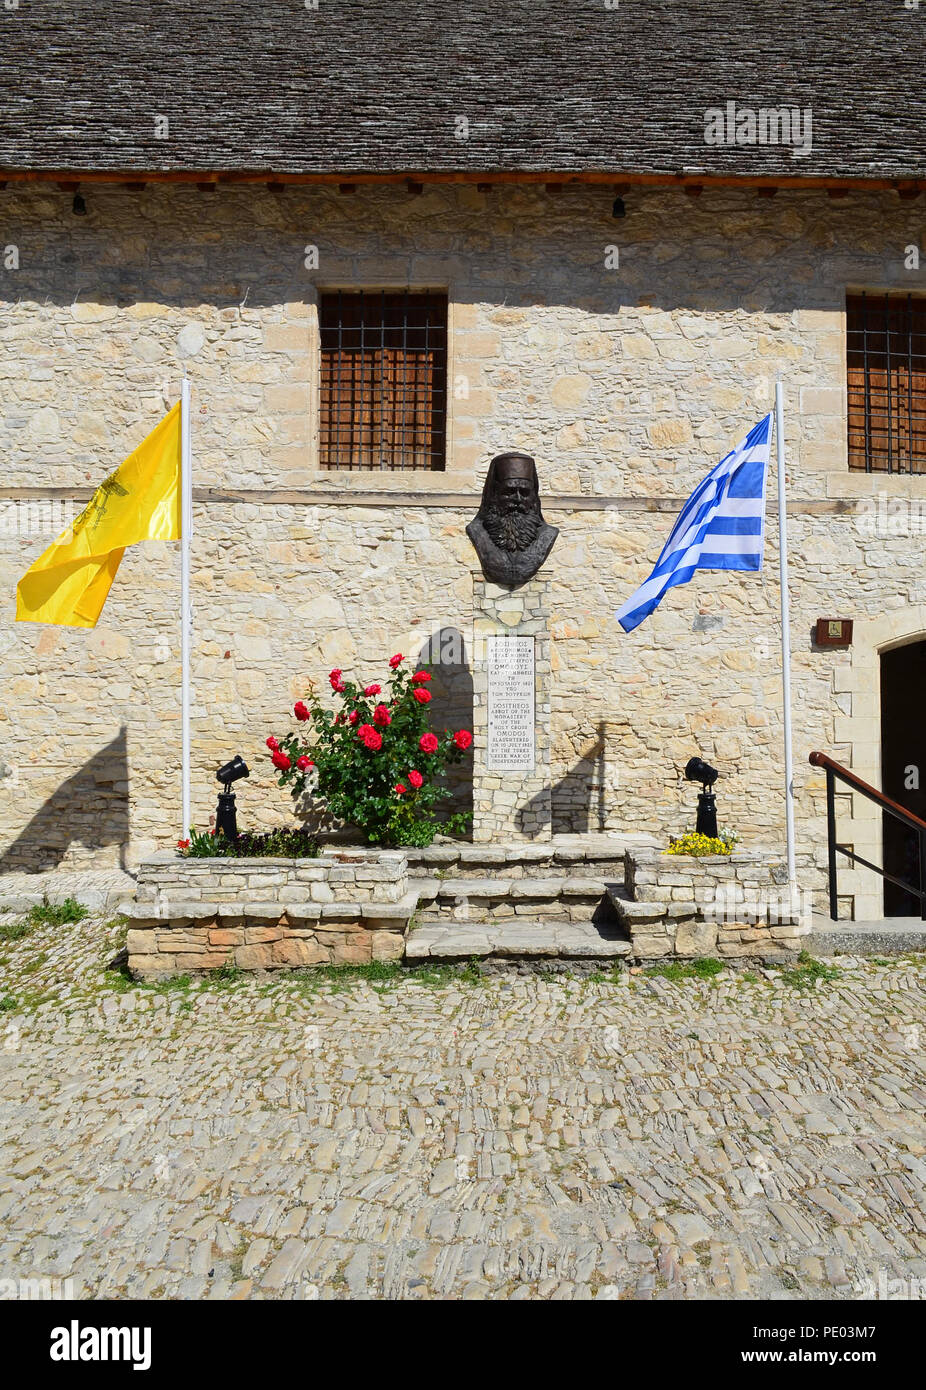 OMODOS-CYPRUS - MAY 15 2015. Abbot Bust at Omodos village in the Troodos mountains of Cyprus. Street and building. Stock Photo